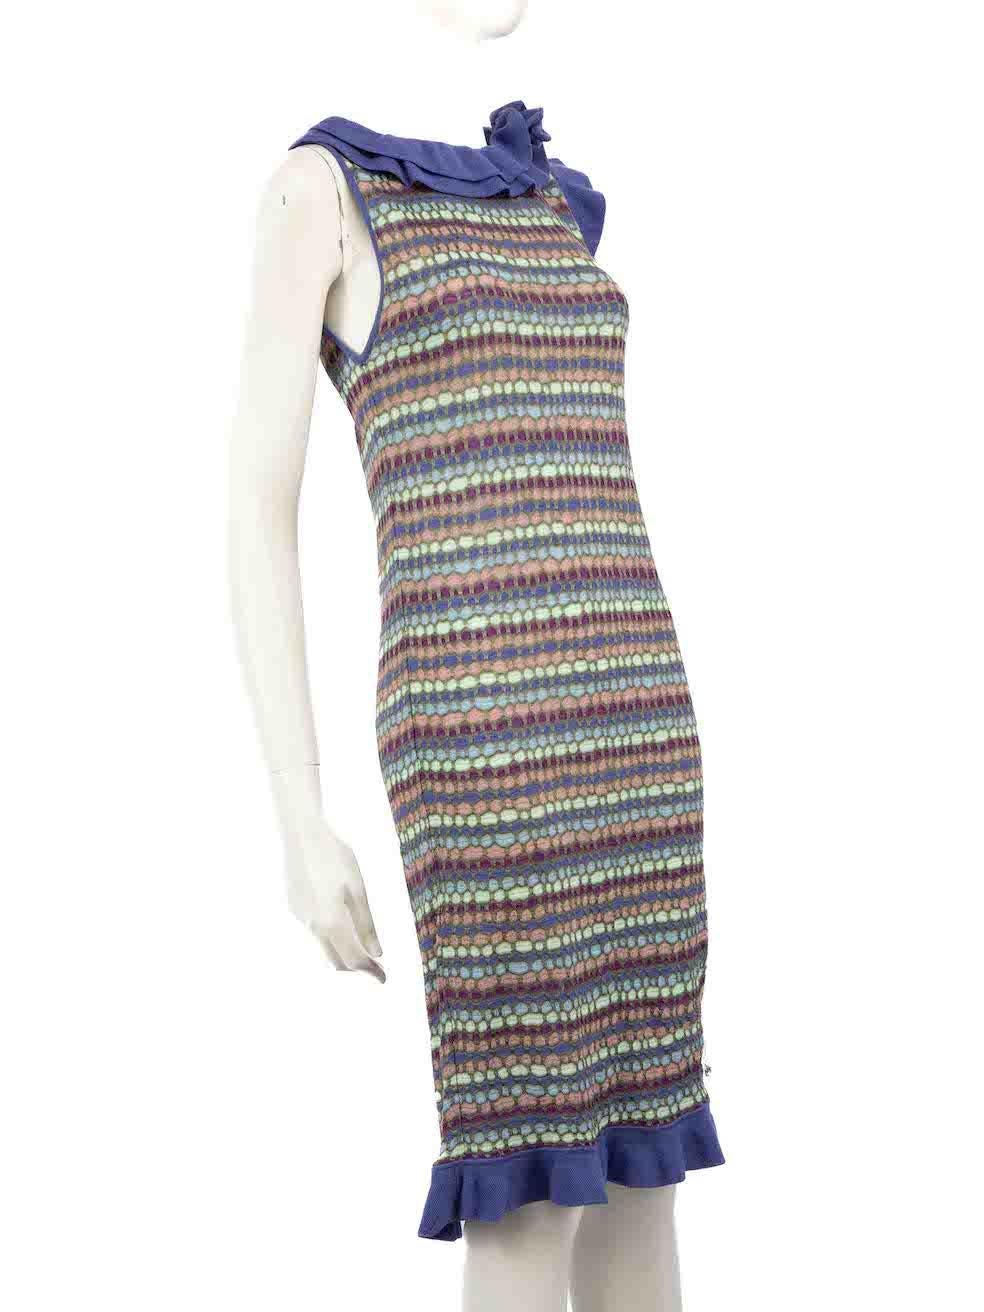 CONDITION is Very good. Minimal wear to dress is evident. Minimal wear to the front near the hemline is seen with a pull to weave on this used M Missoni designer resale item.
 
 
 
 Details
 
 
 Multicolour- purple tone
 
 Viscose
 
 Knit dress
 
